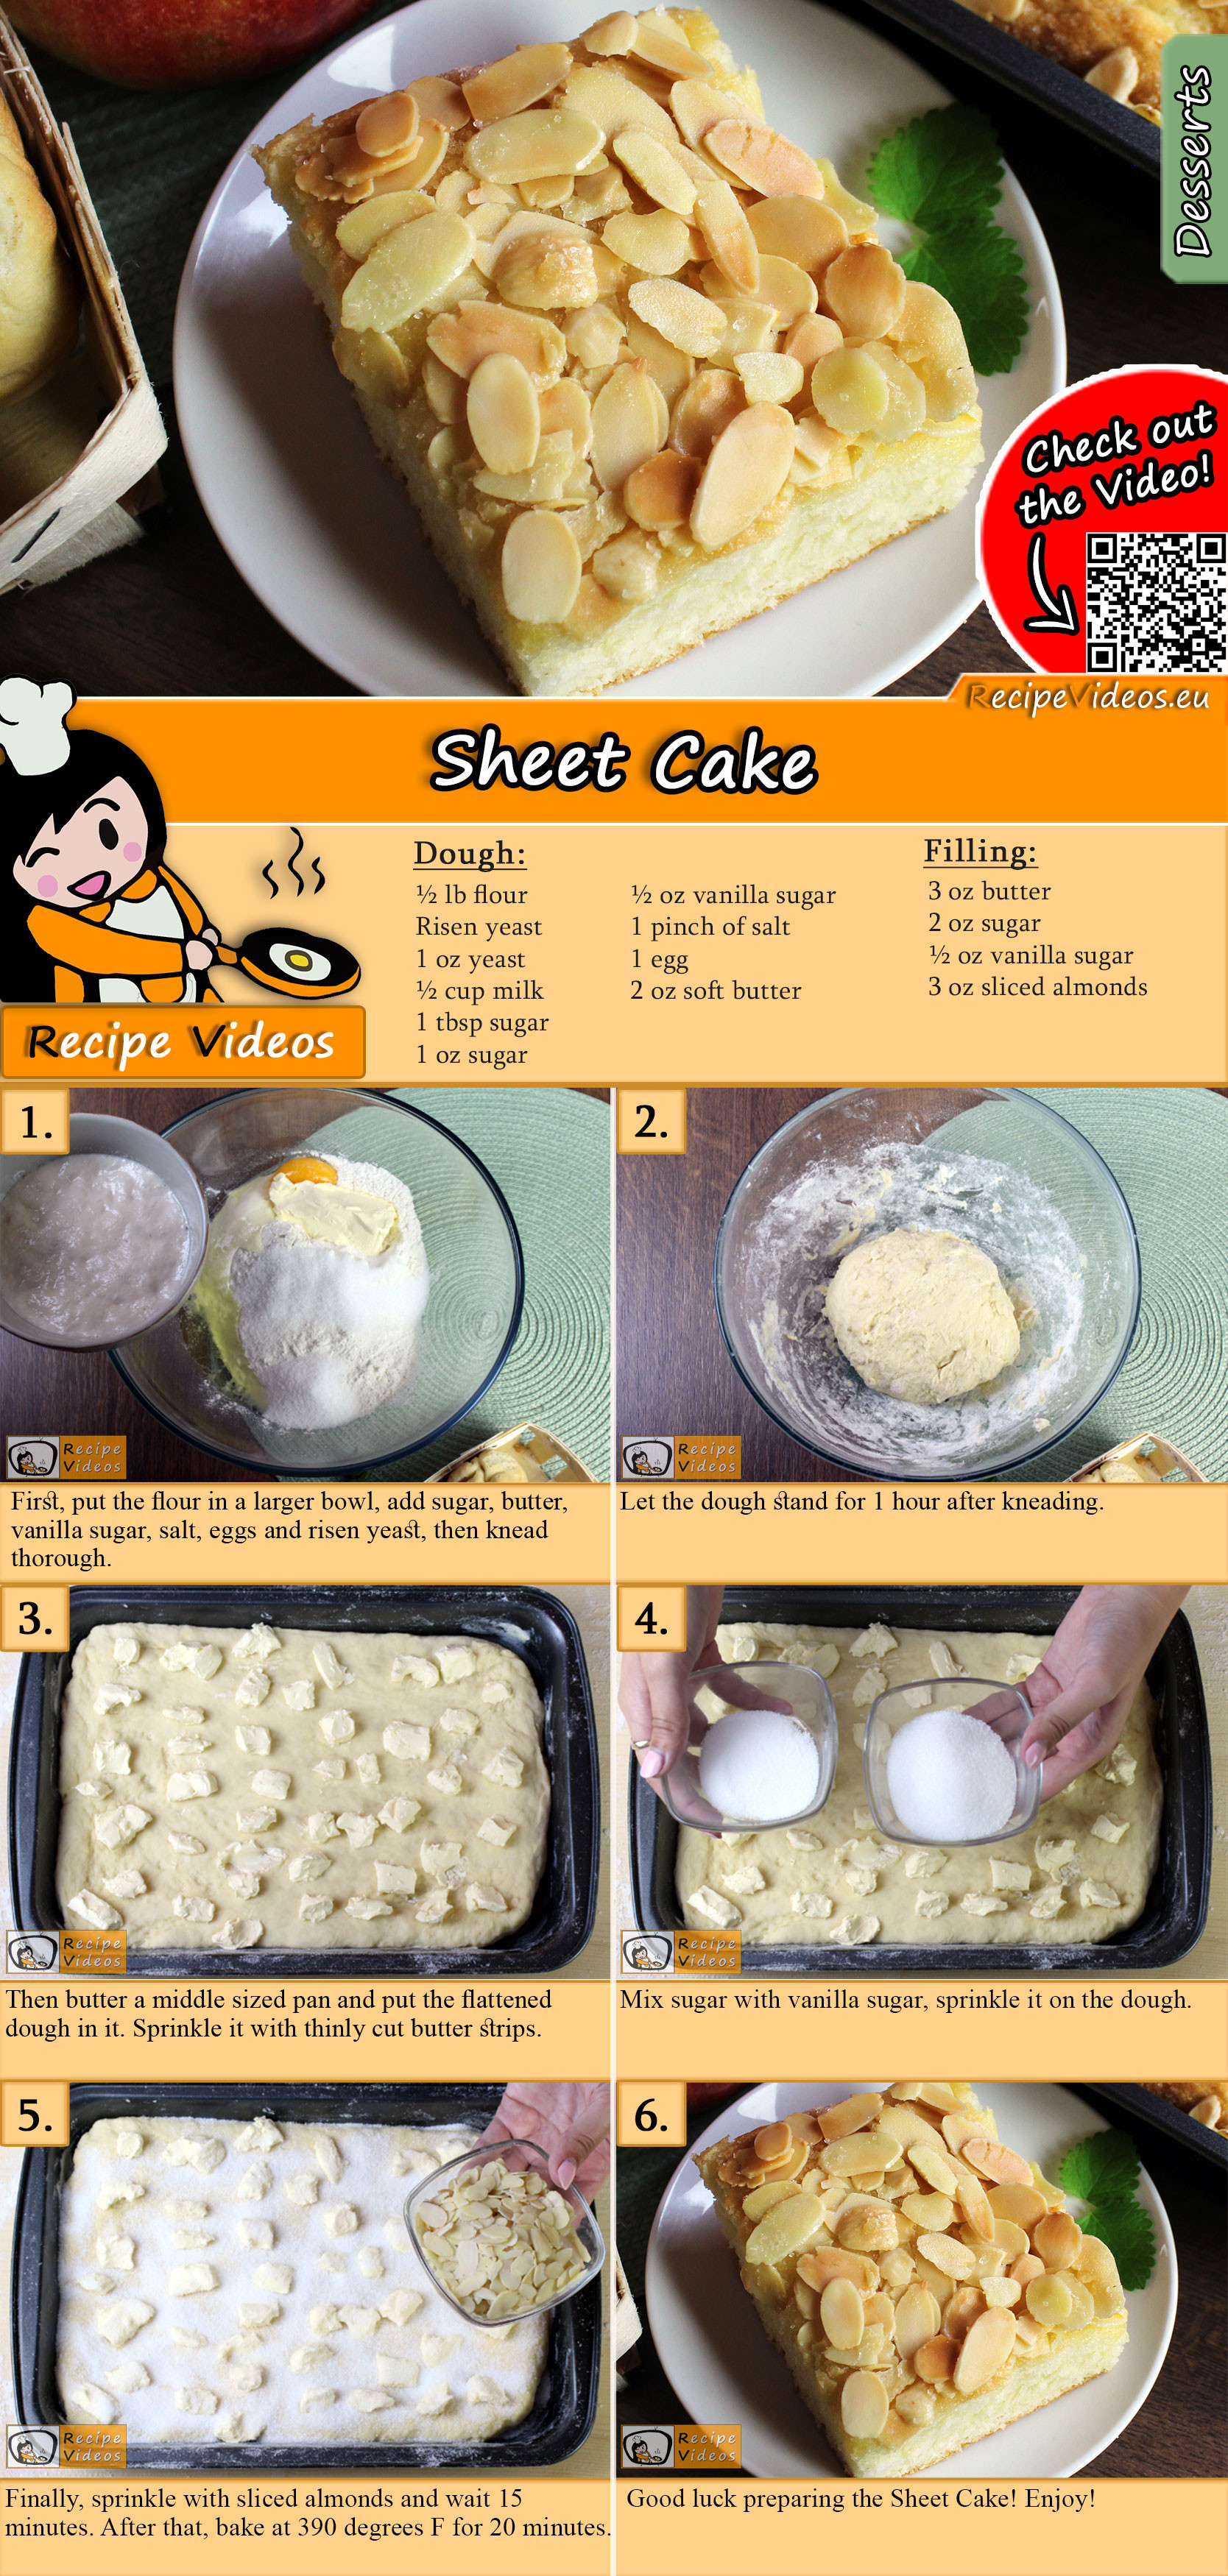 Sheet cake recipe with video